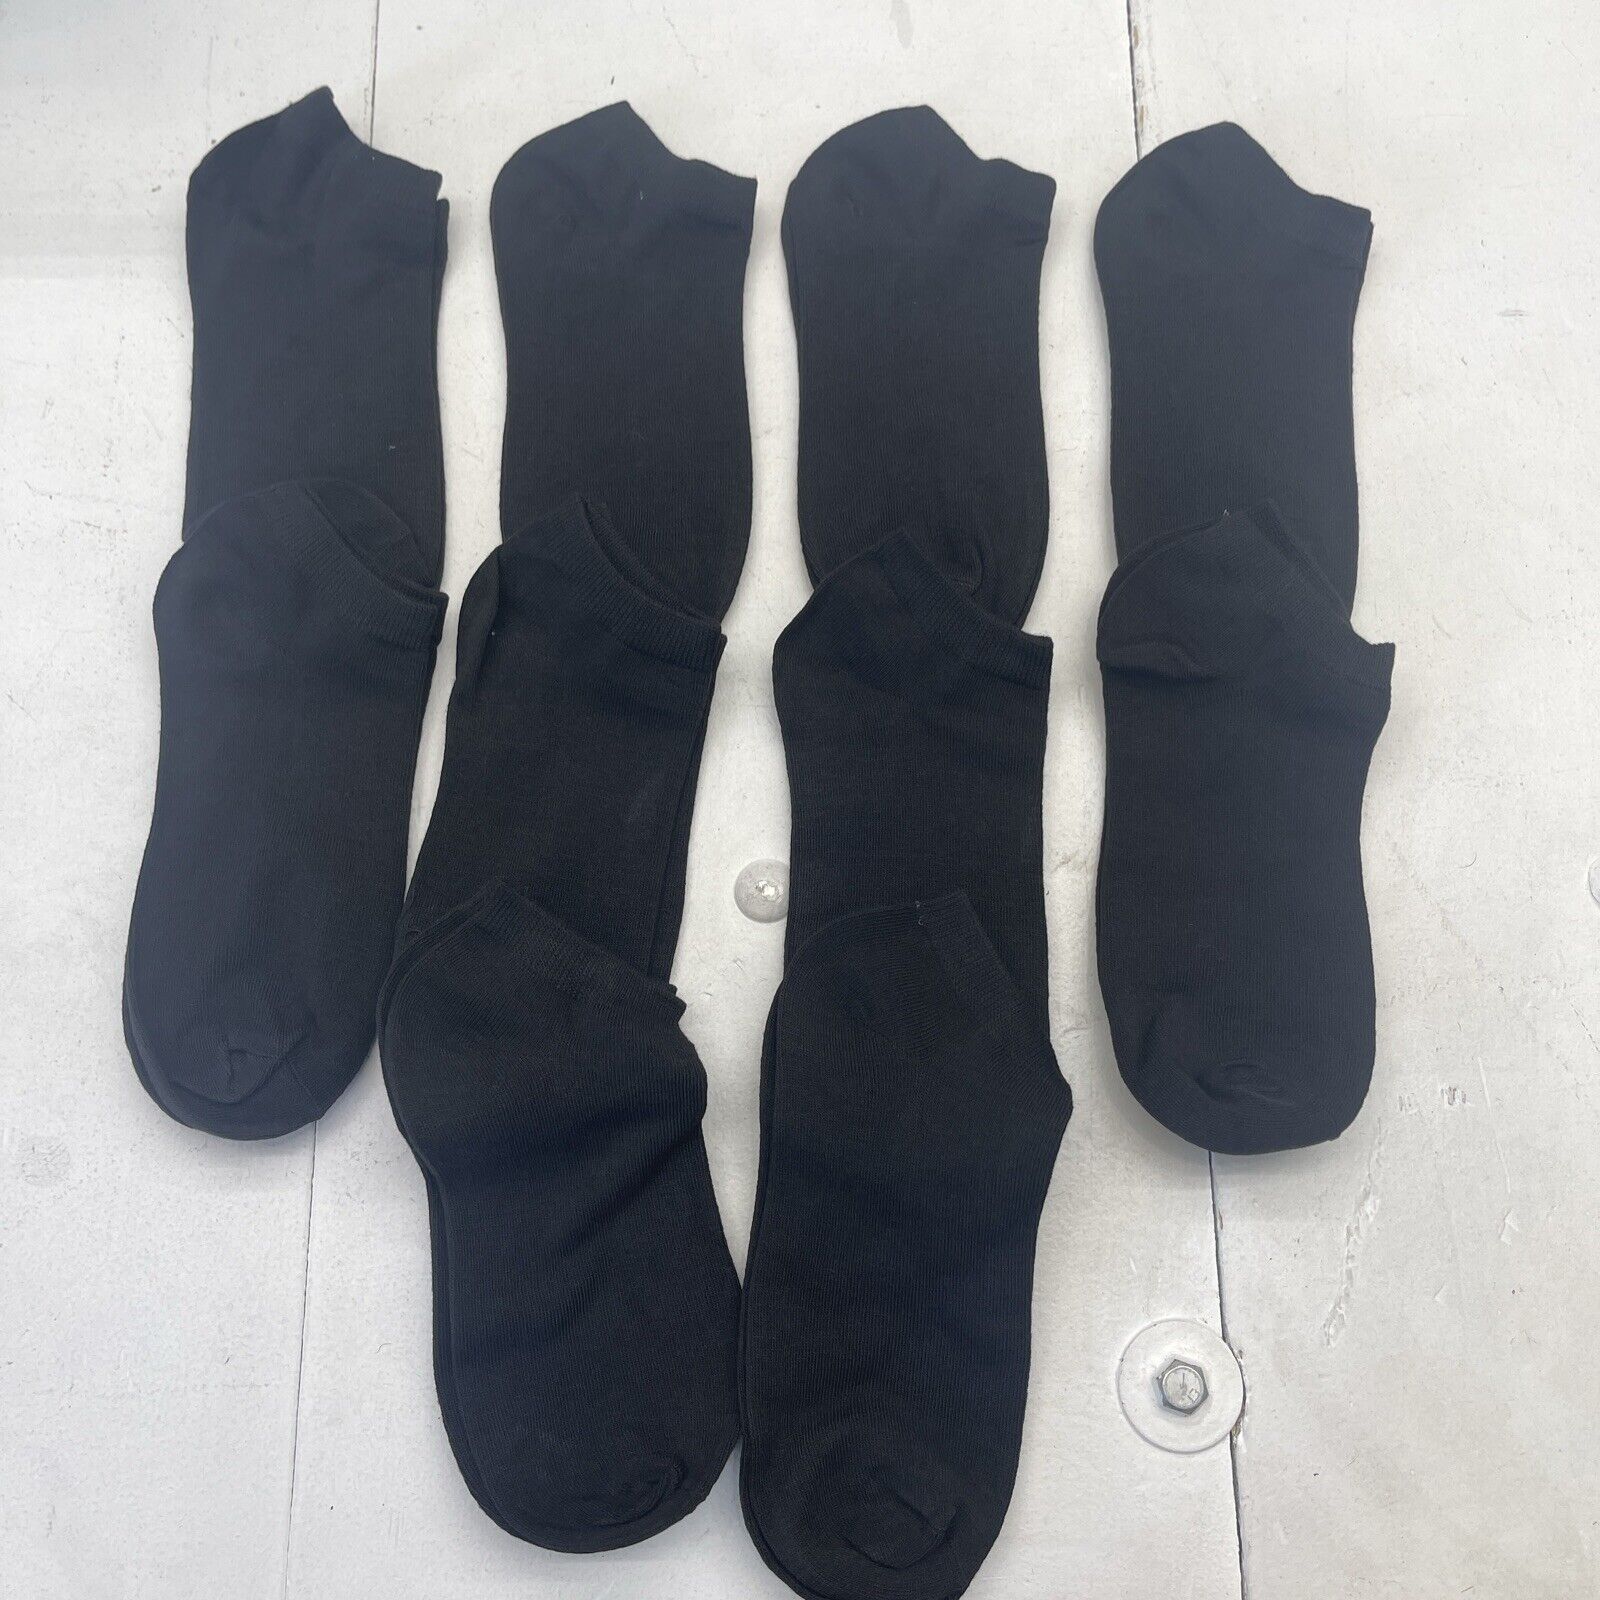 Unisex Adults Black 10 Pack Ankle Socks Size OS